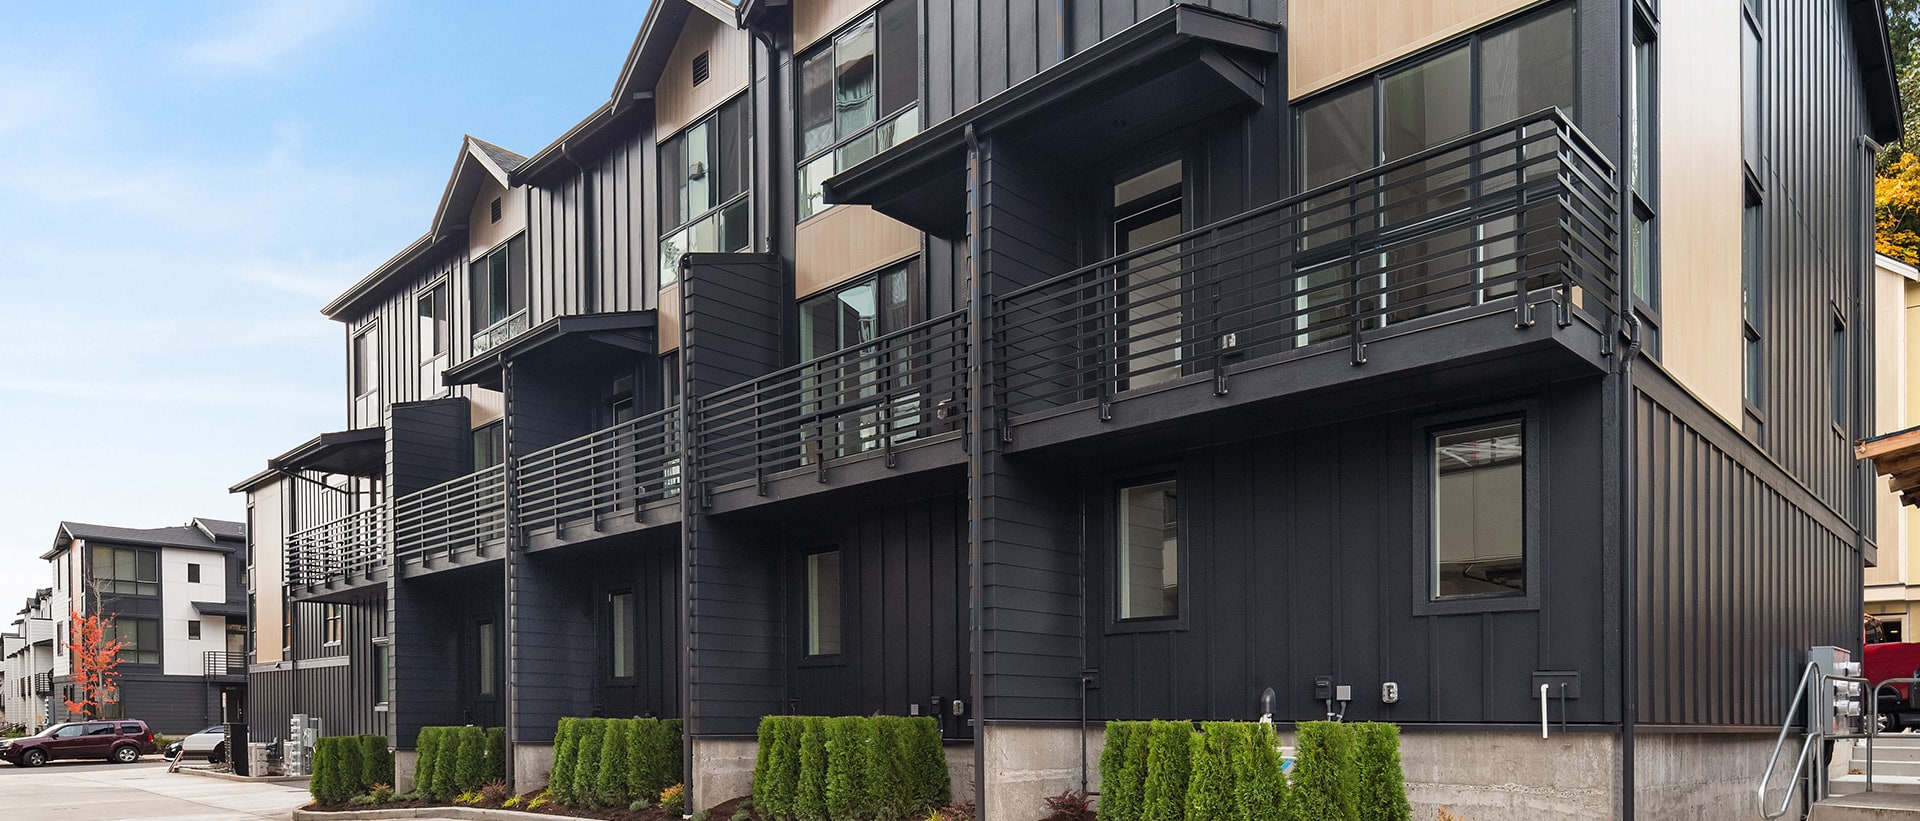 The Fieldhouse Townhomes